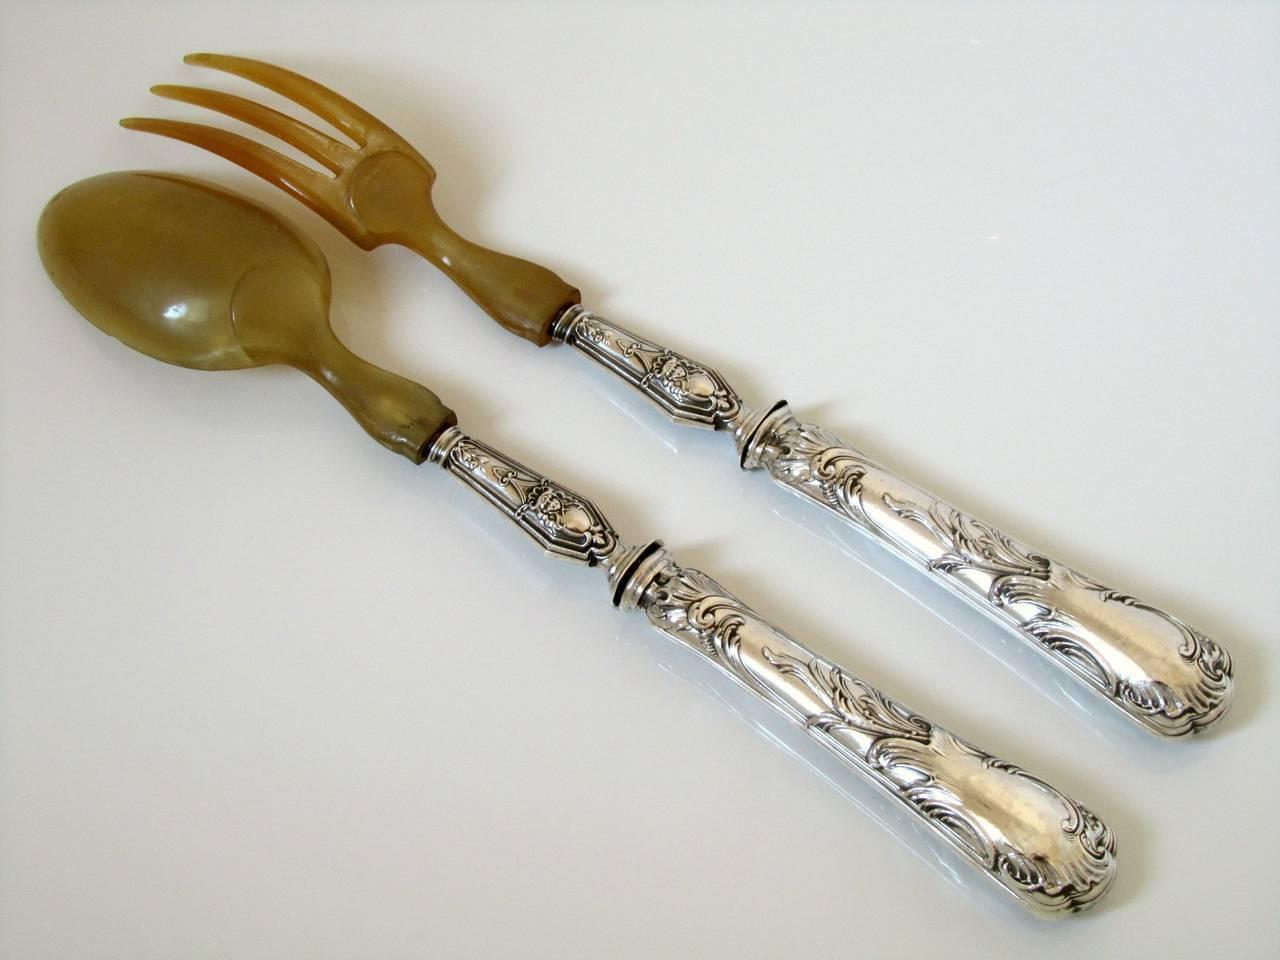 Gorgeous French Rococo Sterling Silver Salad Serving Carving Set 4 Pc with Box For Sale 1